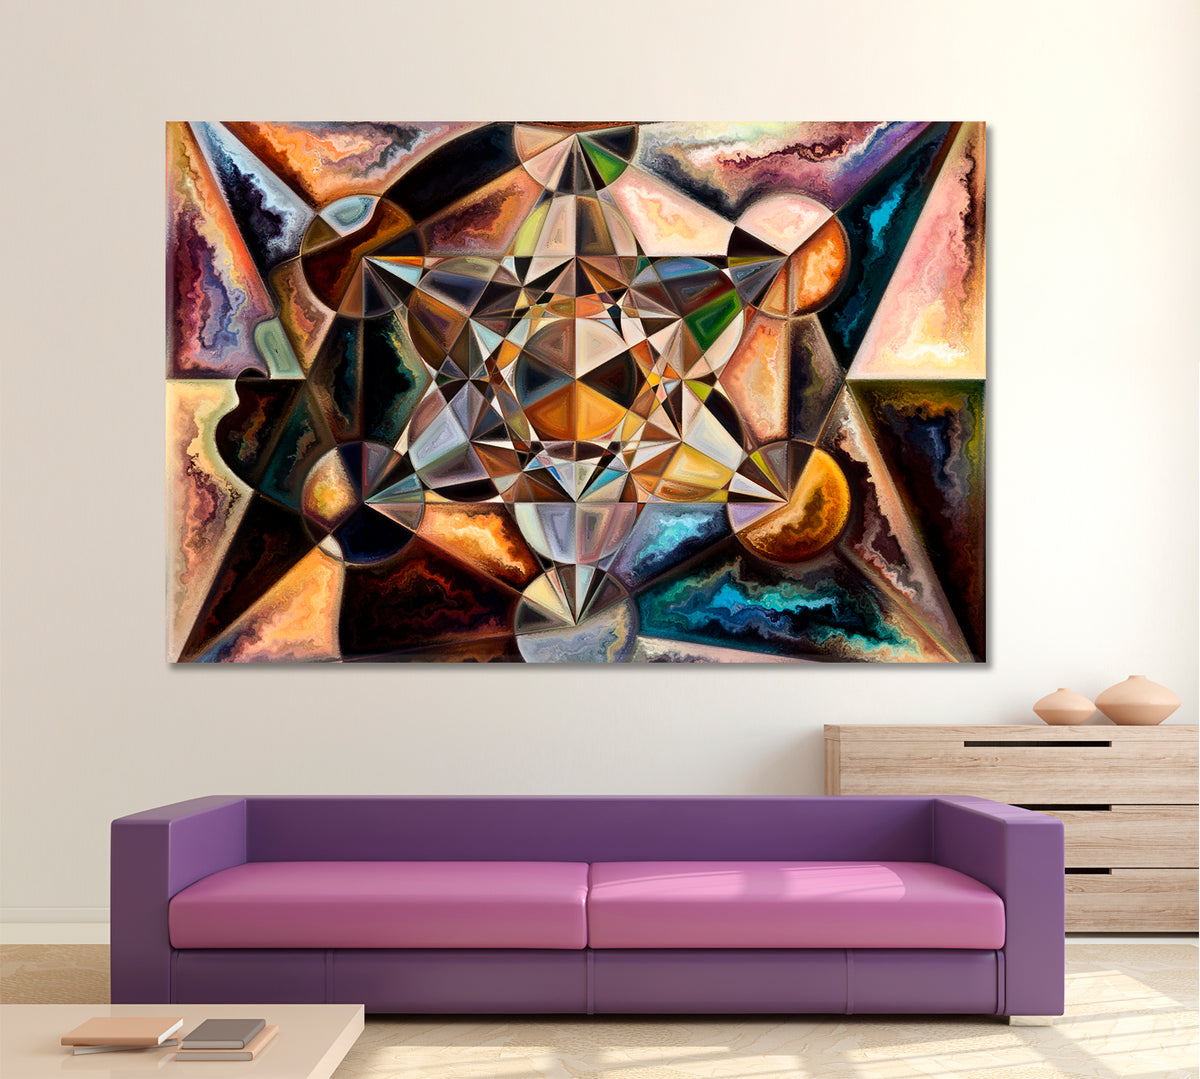 ABSTRACT GEOMETRIC FORMS Eye Catching Patterns Abstract Art Print Artesty 1 panel 24" x 16" 